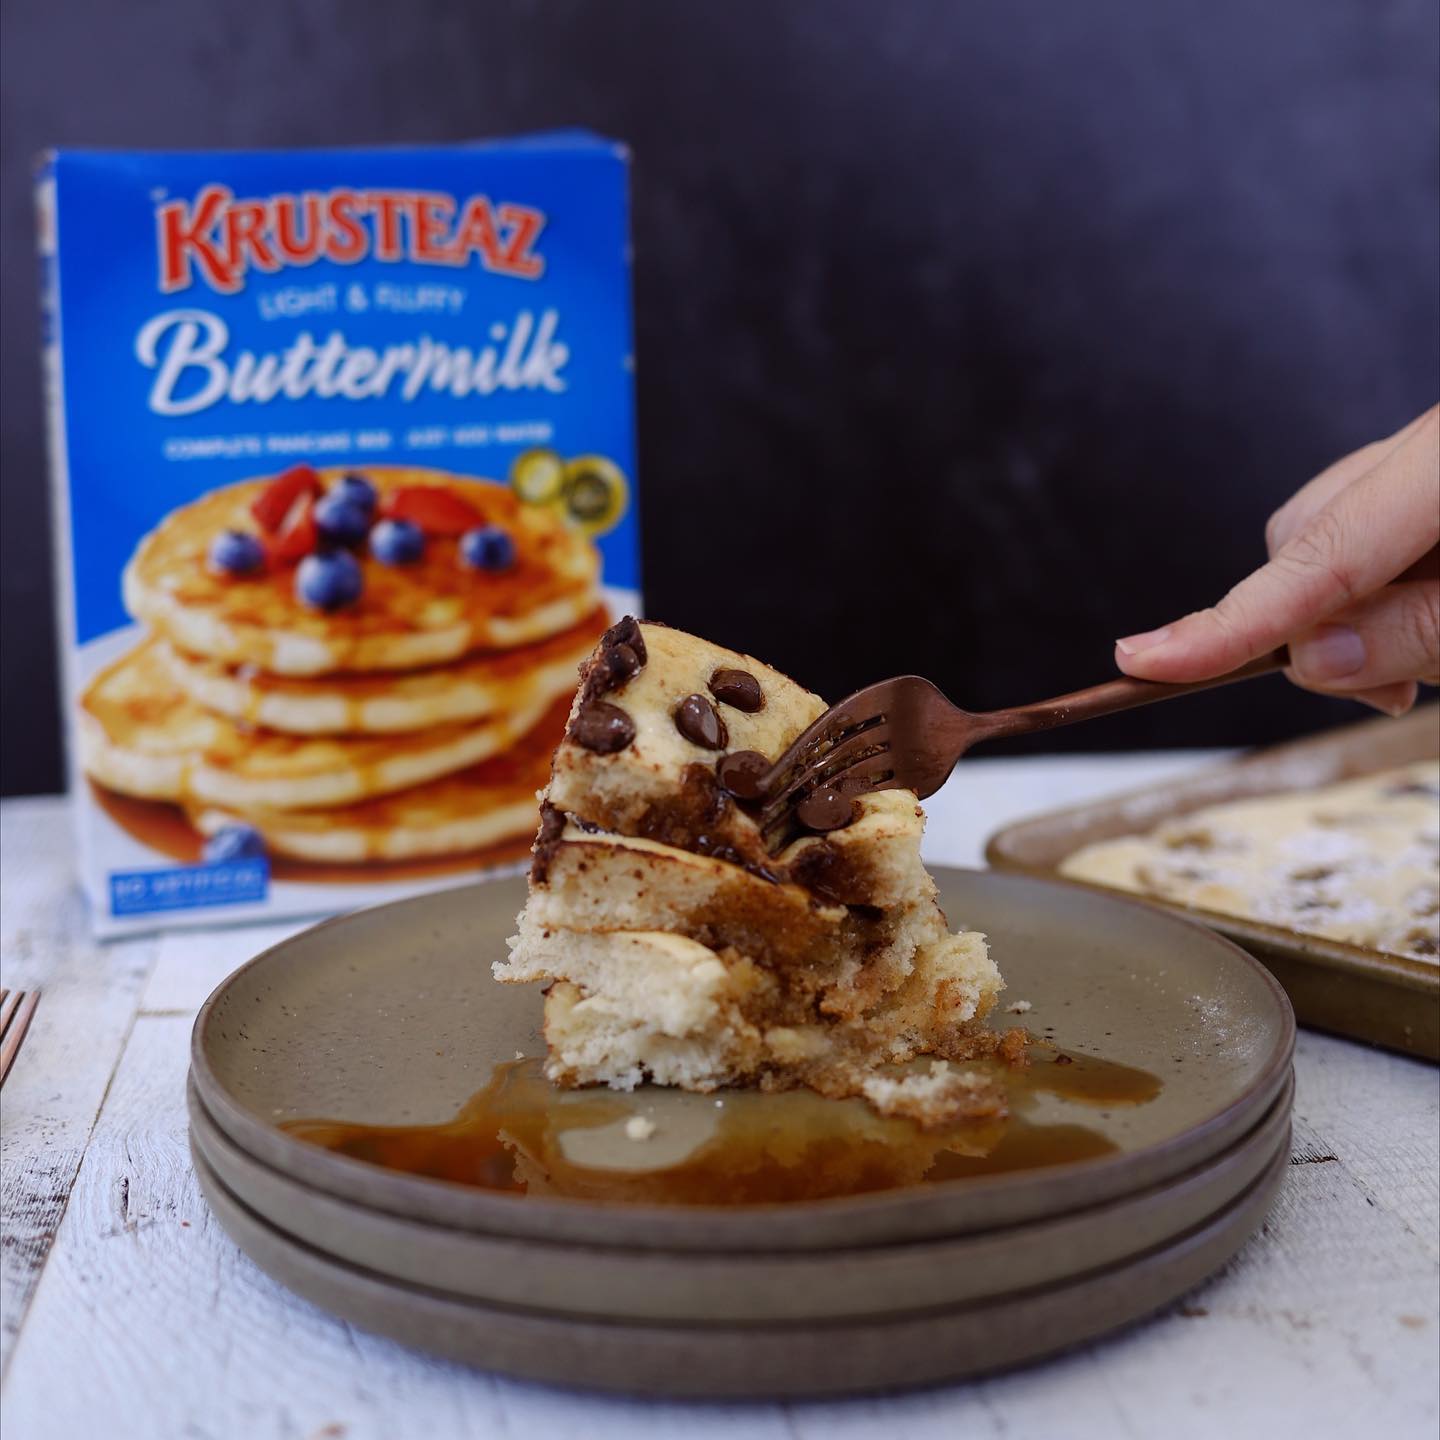 A person takes a fork to a stack of sheet pan pancake slices, made with Krusteaz Buttermilk Pancake mix.